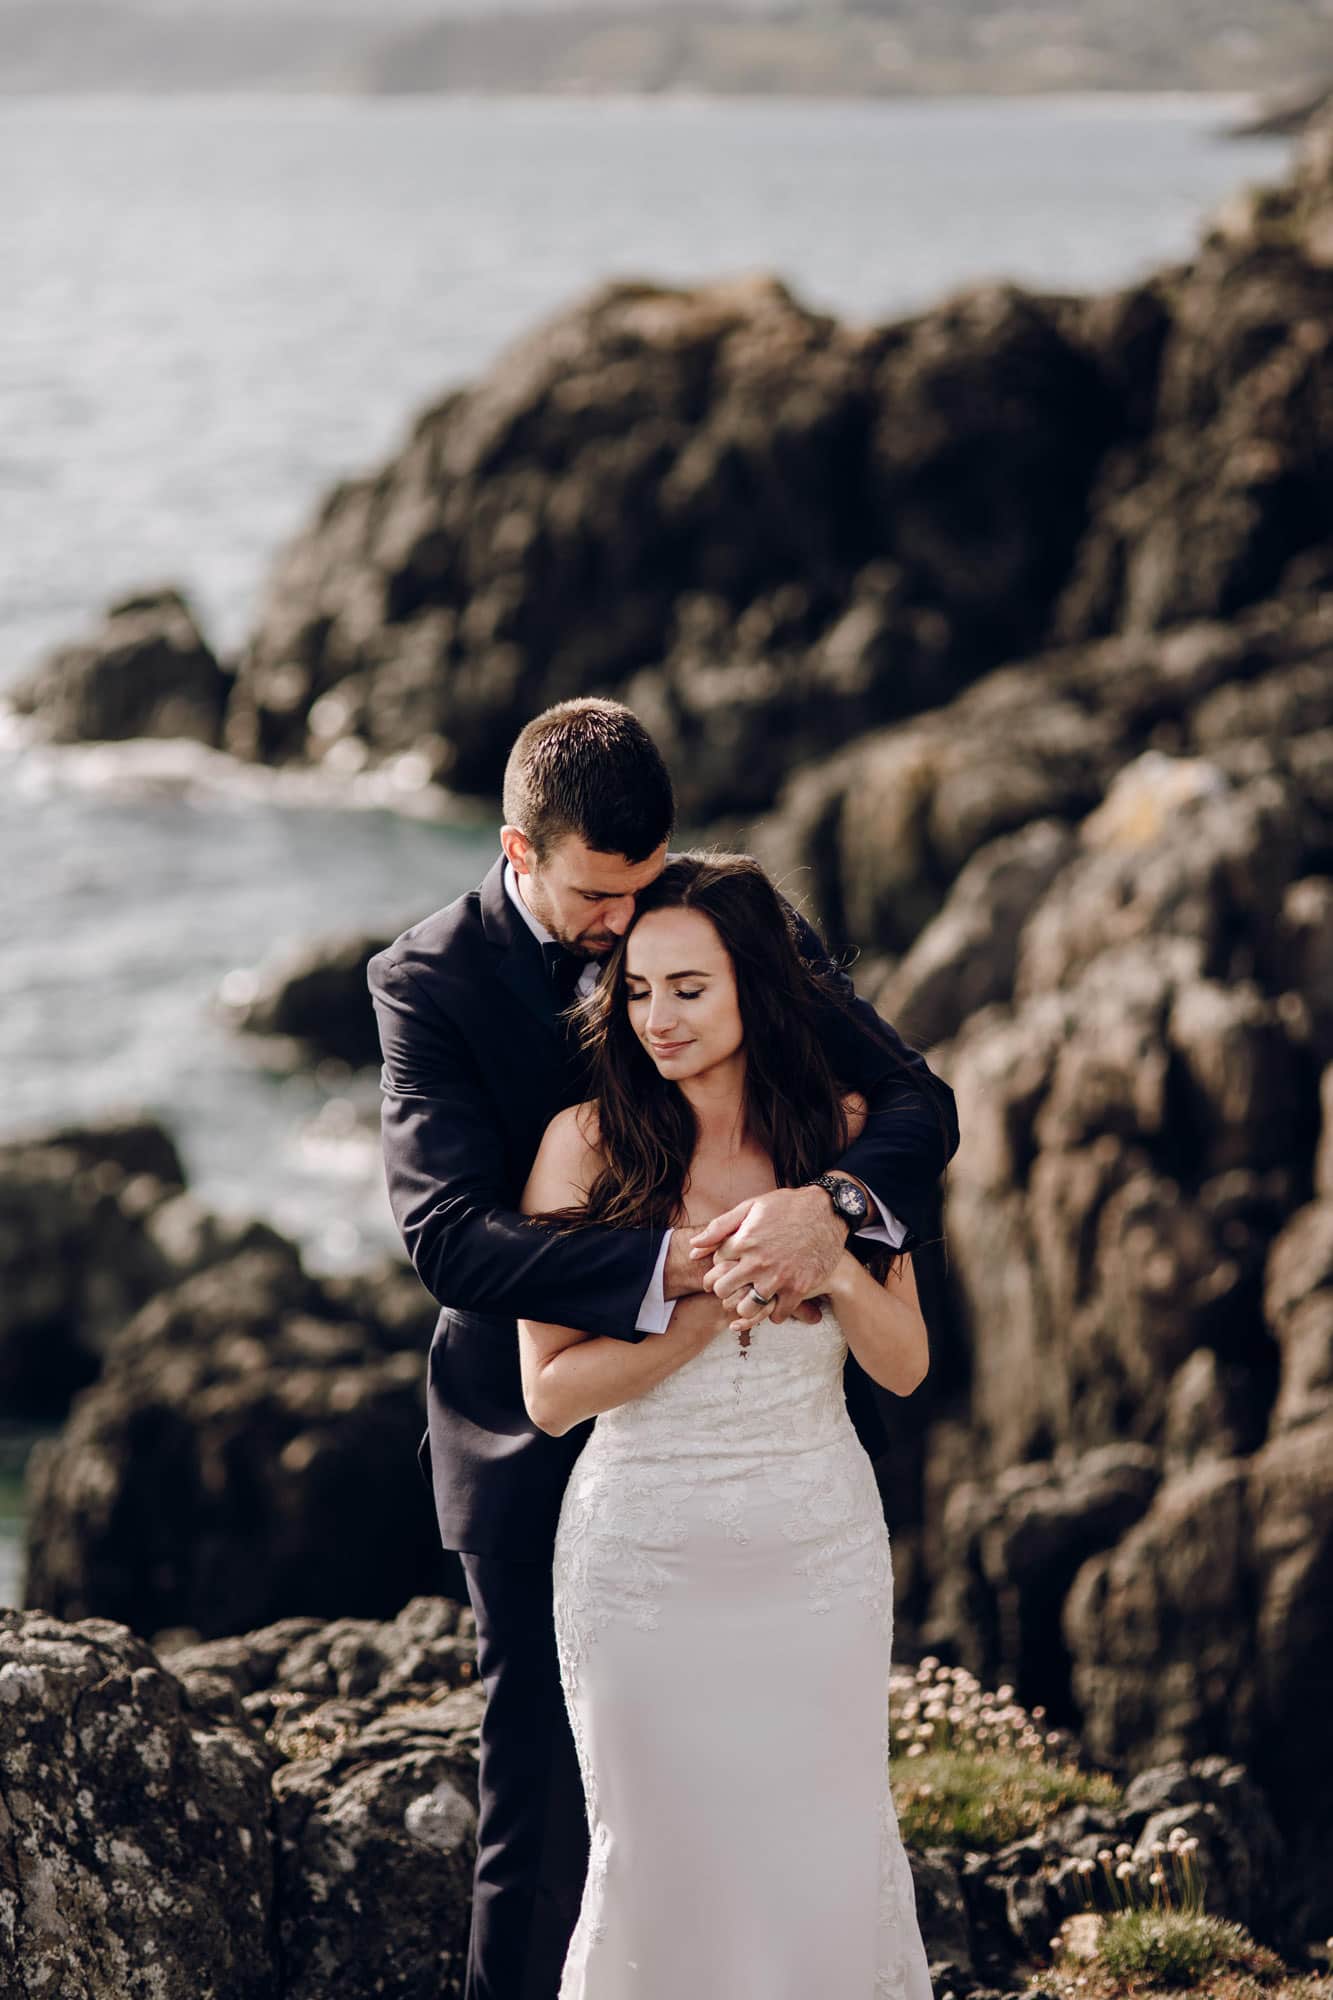 Airbnb Elopement Sooke BC Otter Point Weddings Intimate-3